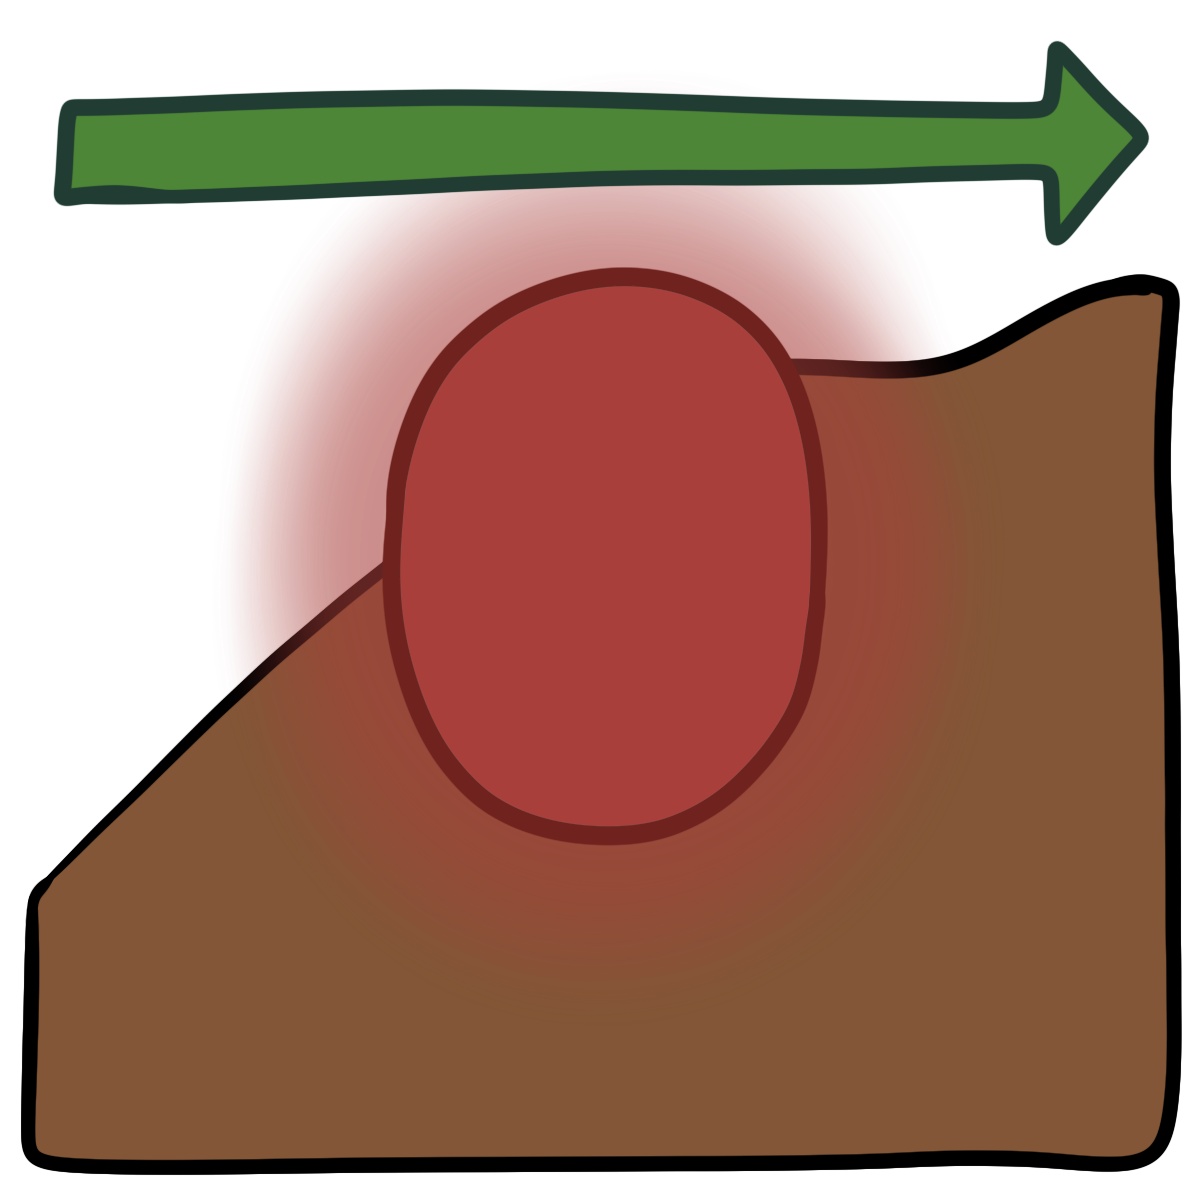 A thin green arrow pointing right above a glowing red oval. Curved medium brown skin fills the bottom half of the background.